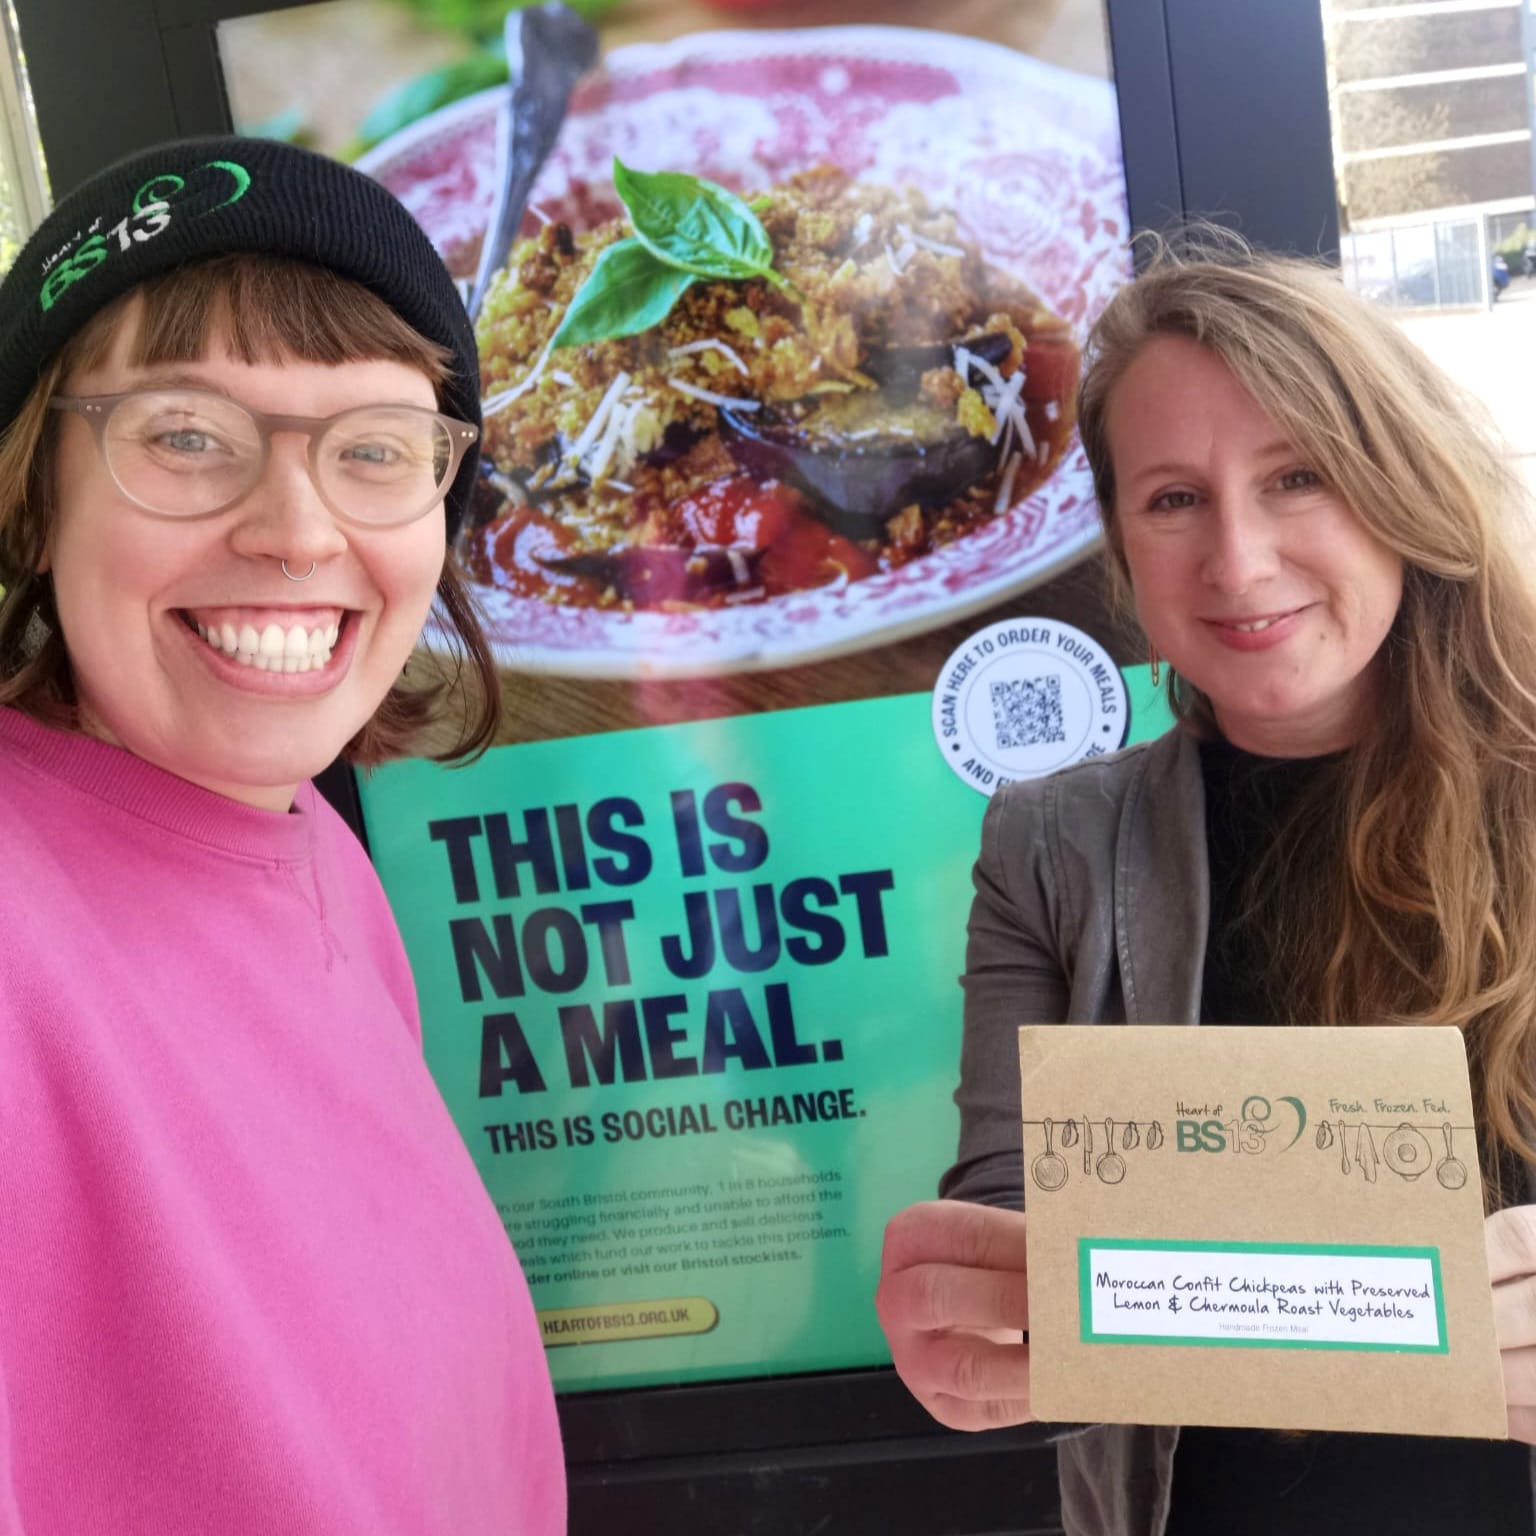 Heart of BS13 ready meal packaging being held by two smiling ladies at bus shelter advert behind.